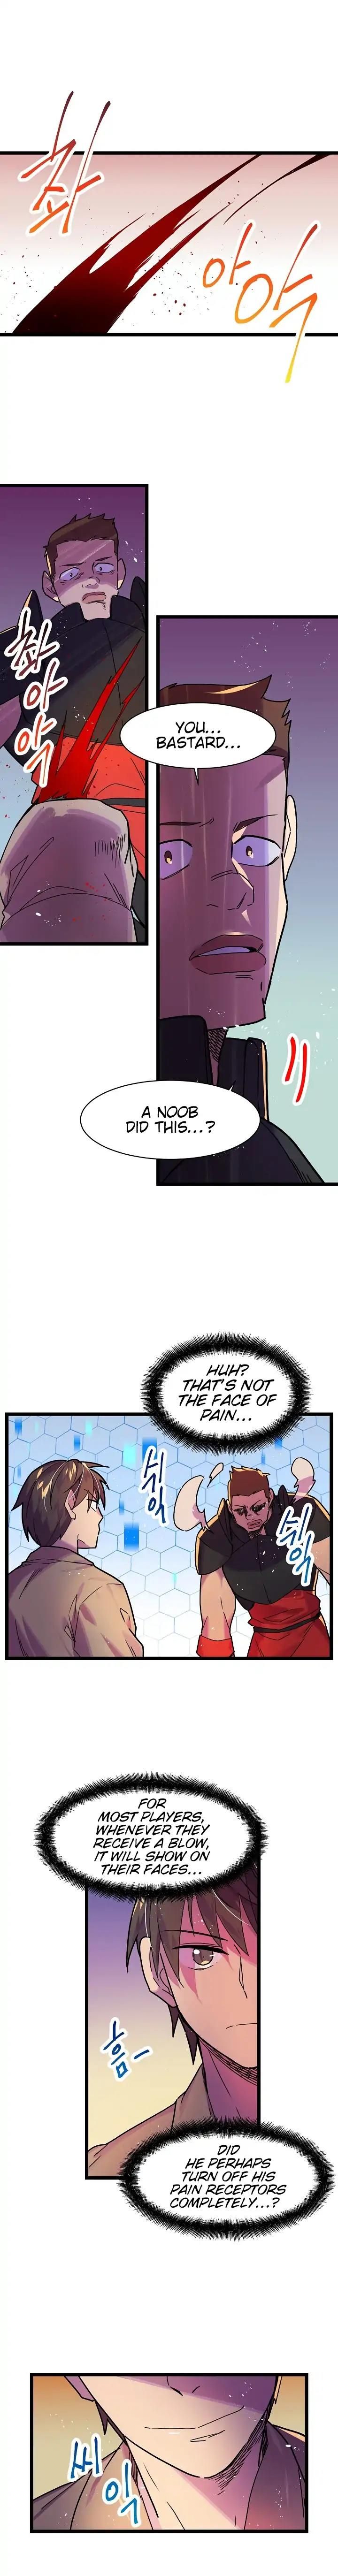 Ranker's Return Chapter 6 page 11